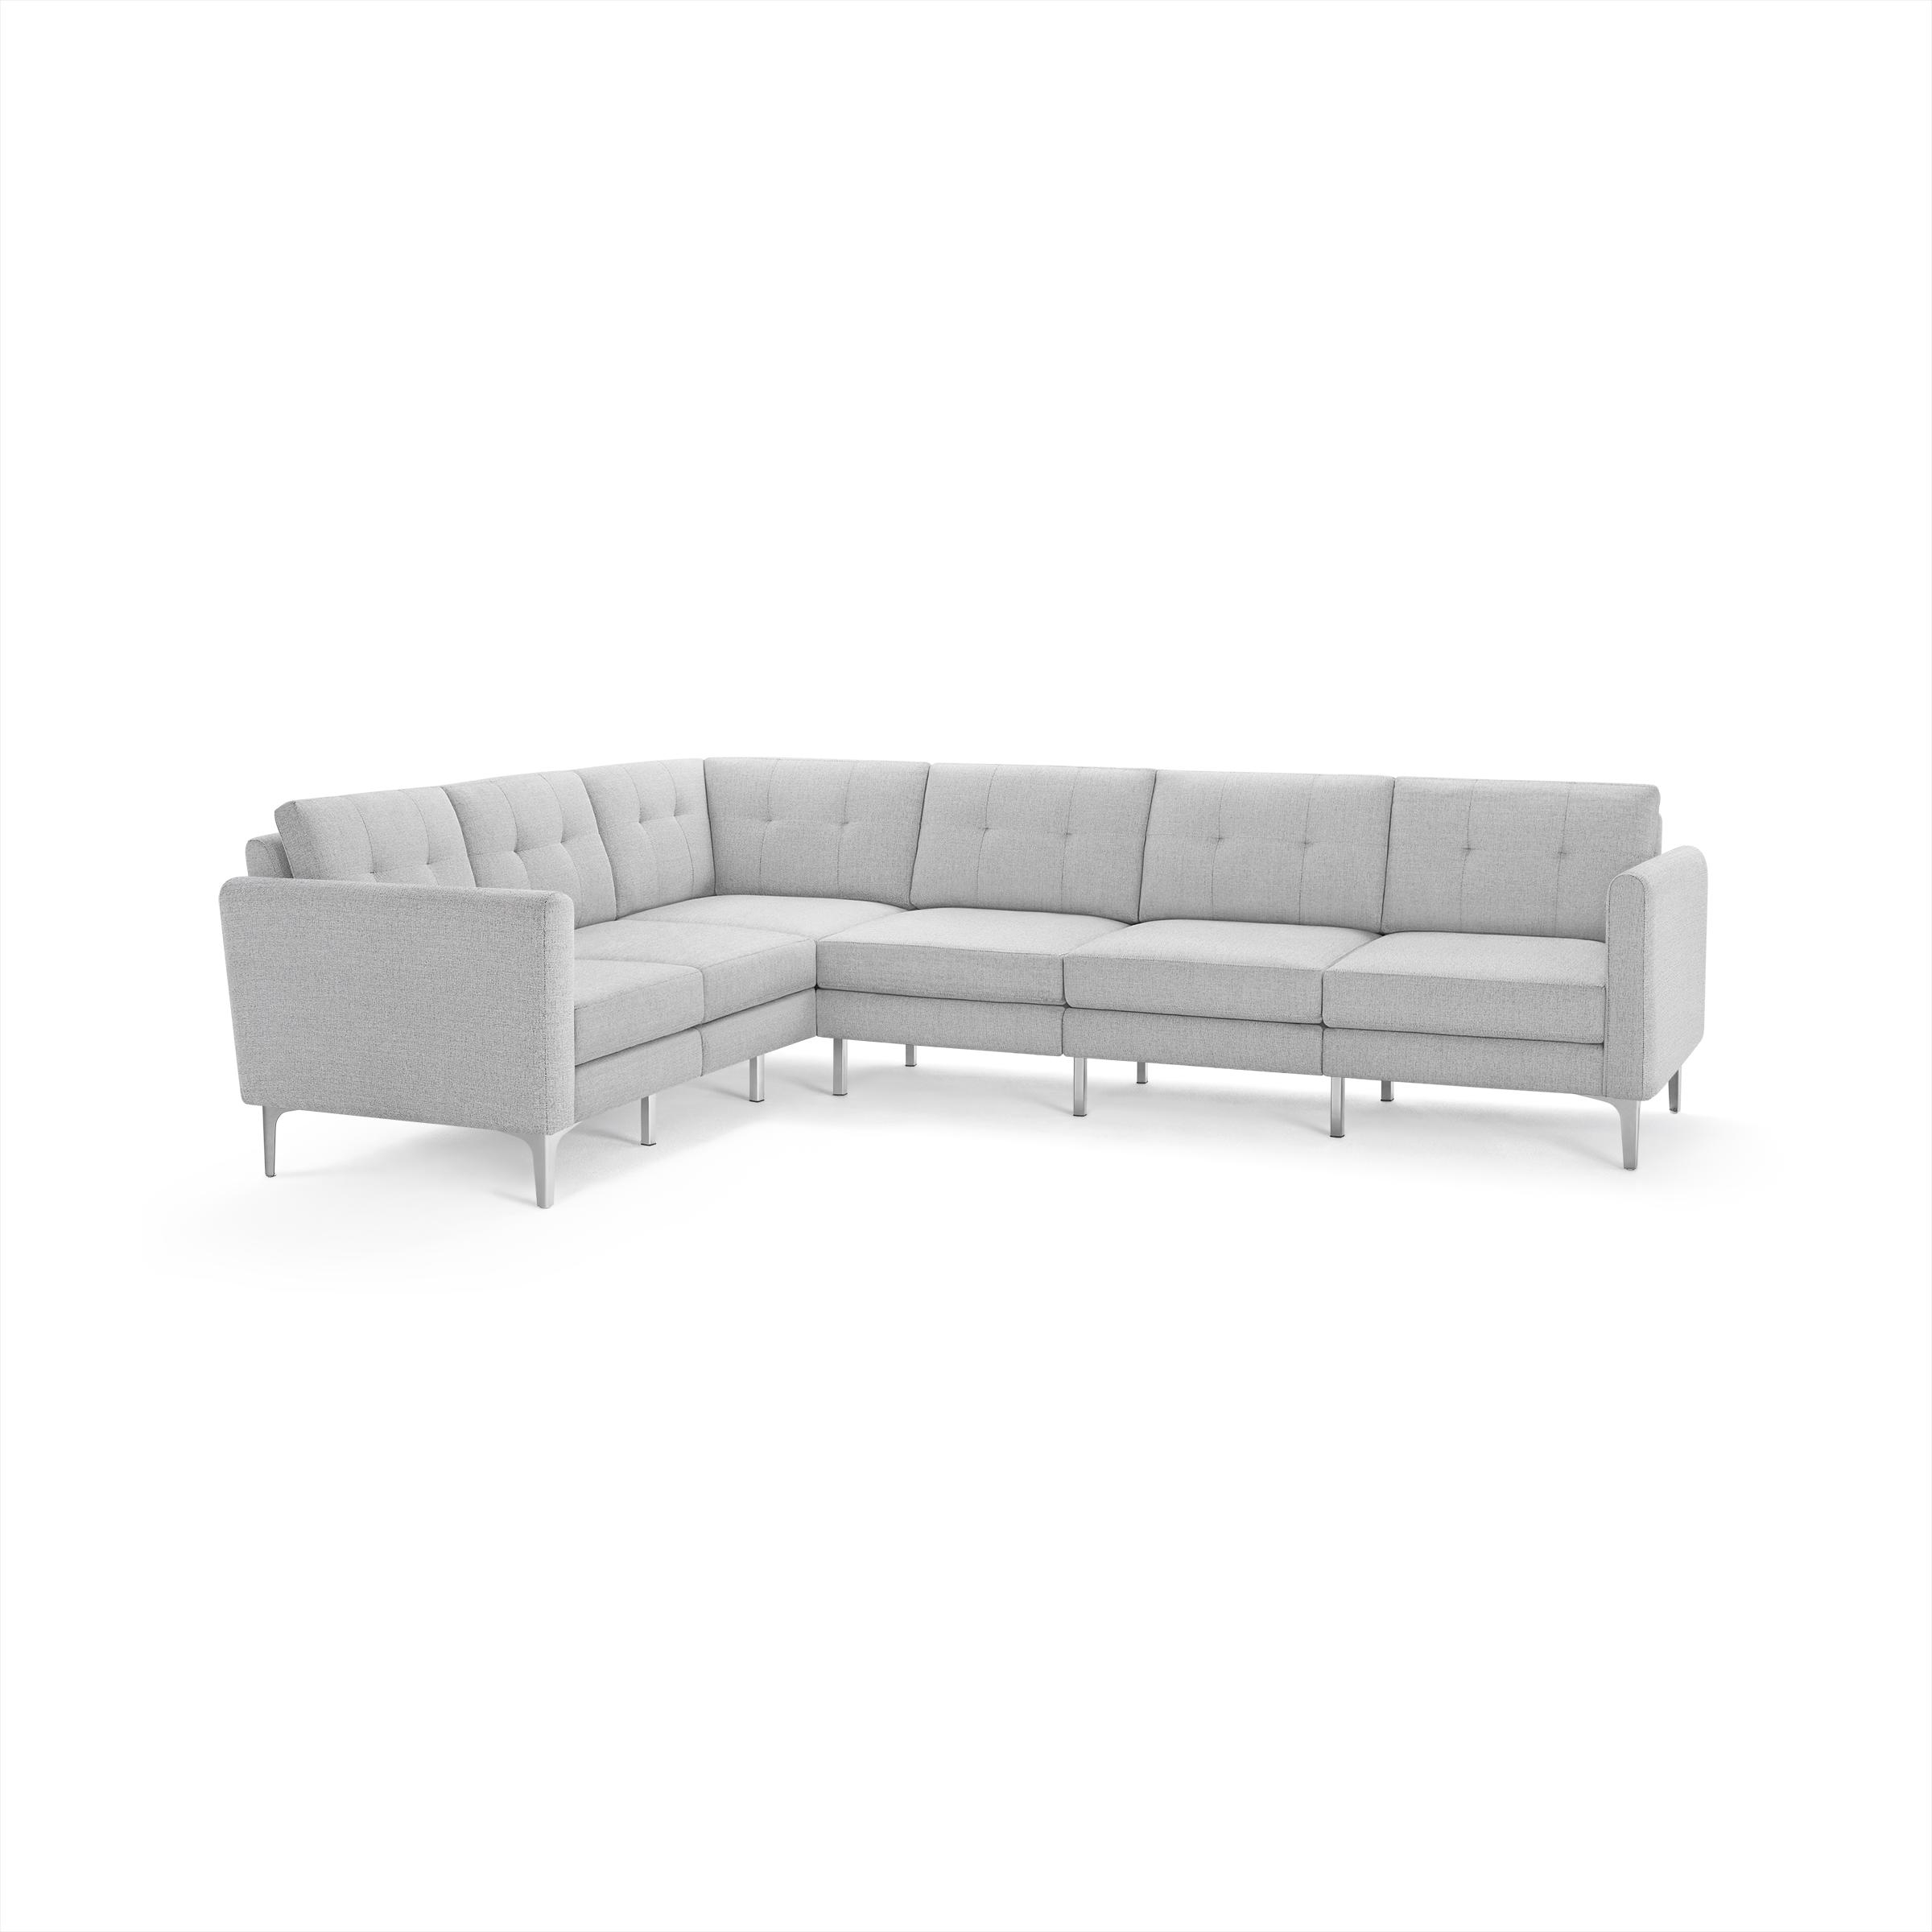 Nomad 6-Seat Corner Sectional in Crushed Gravel - Image 0